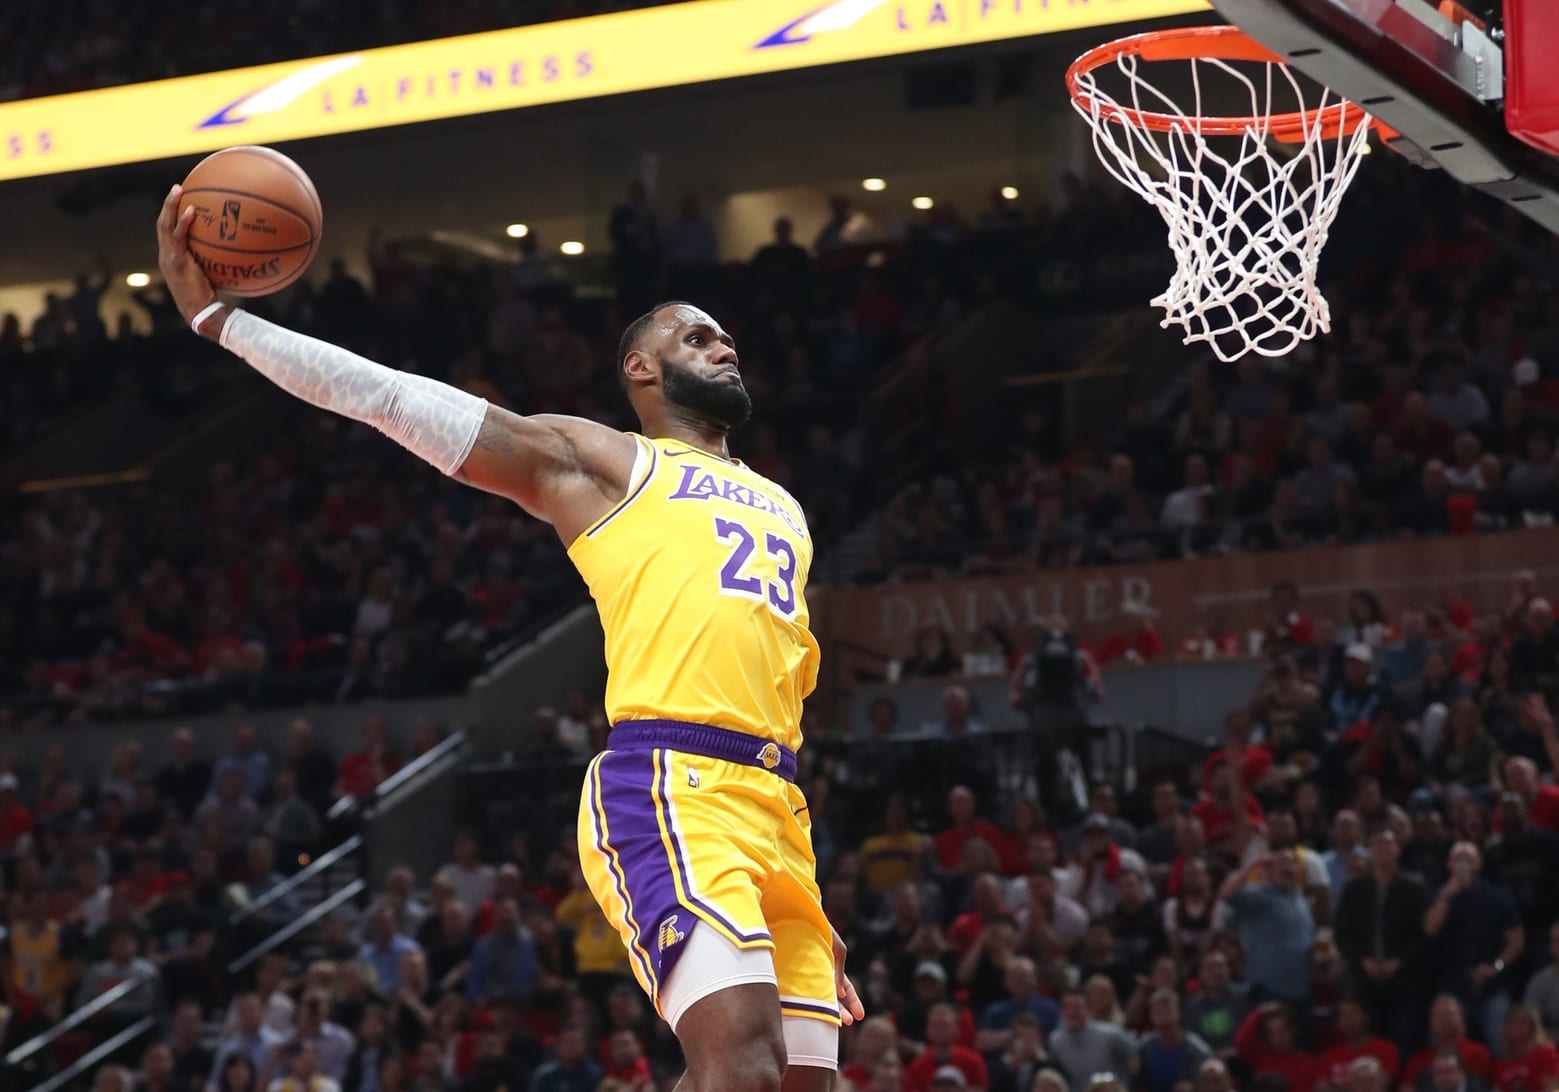 2019 20 Nba Season Schedule Lakers To Play Clippers On Opening Night Lakers Nation